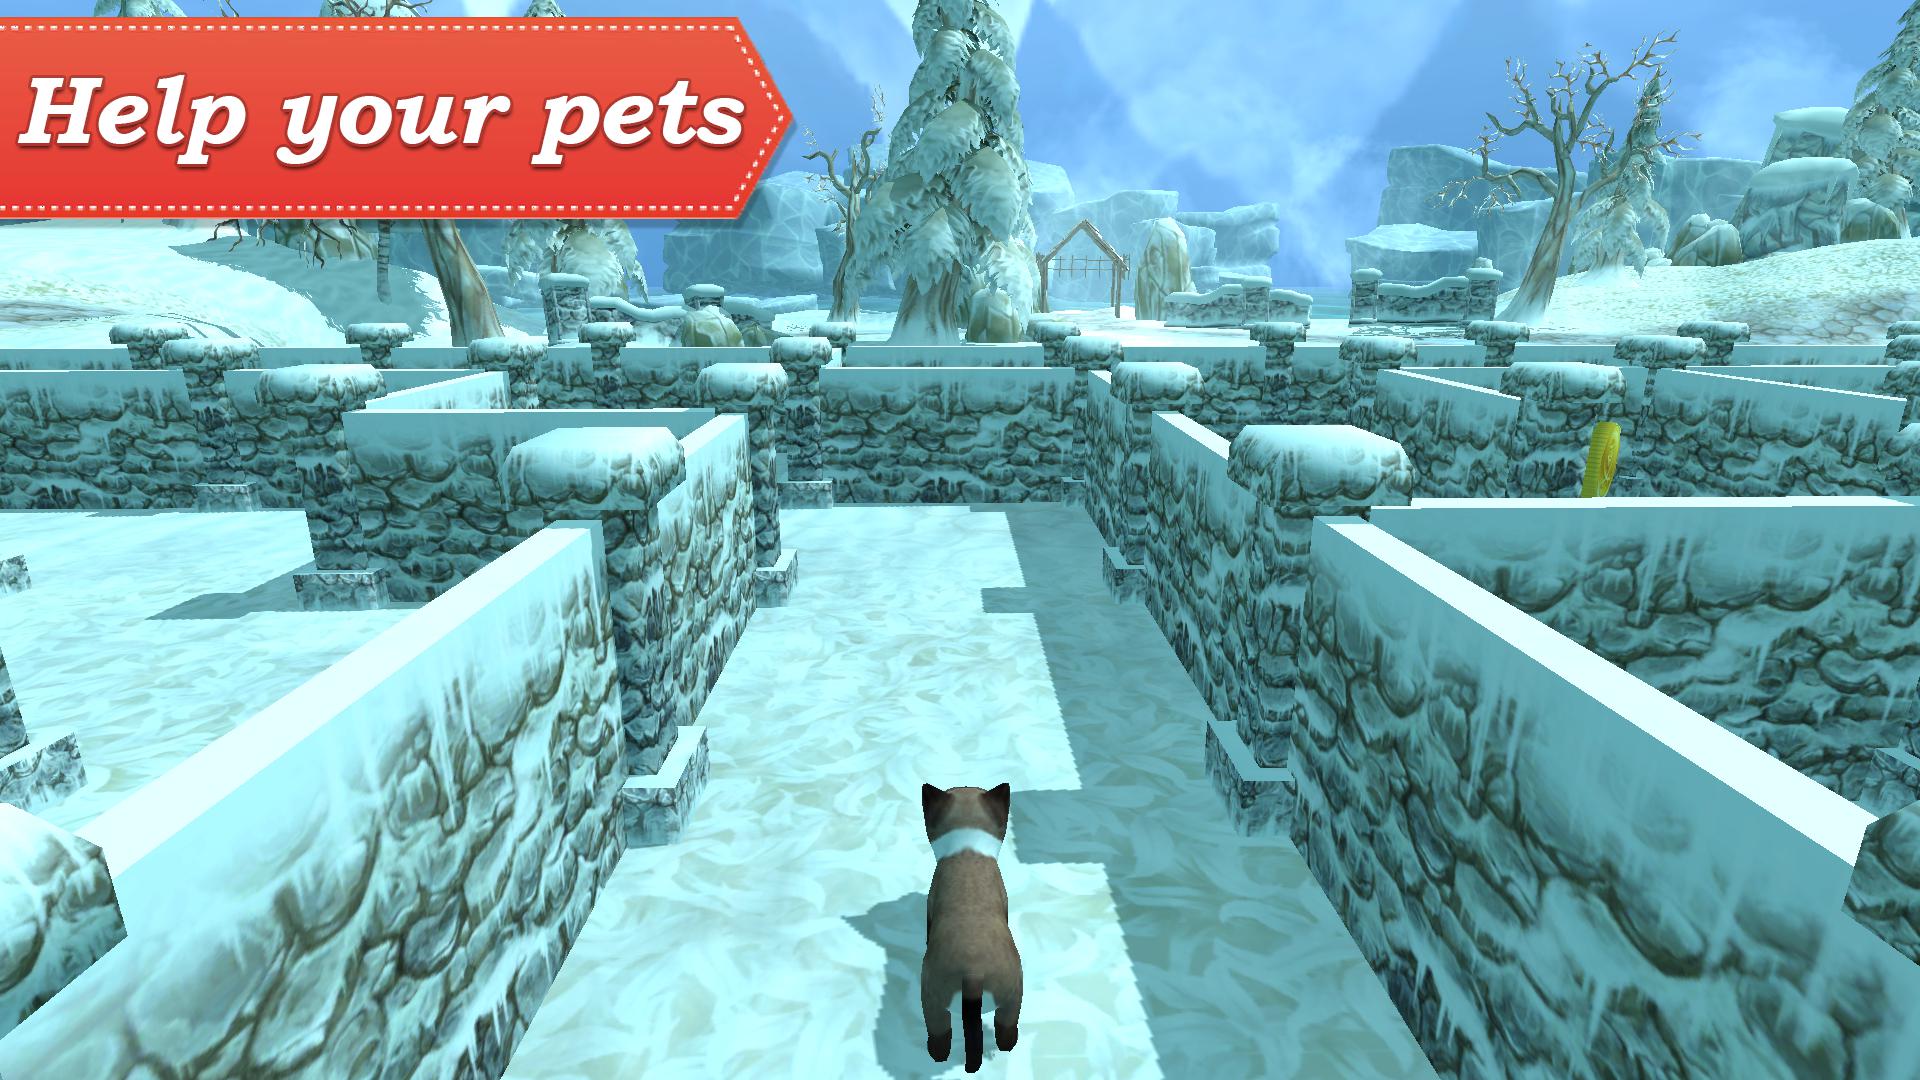 3D Pets in the maze